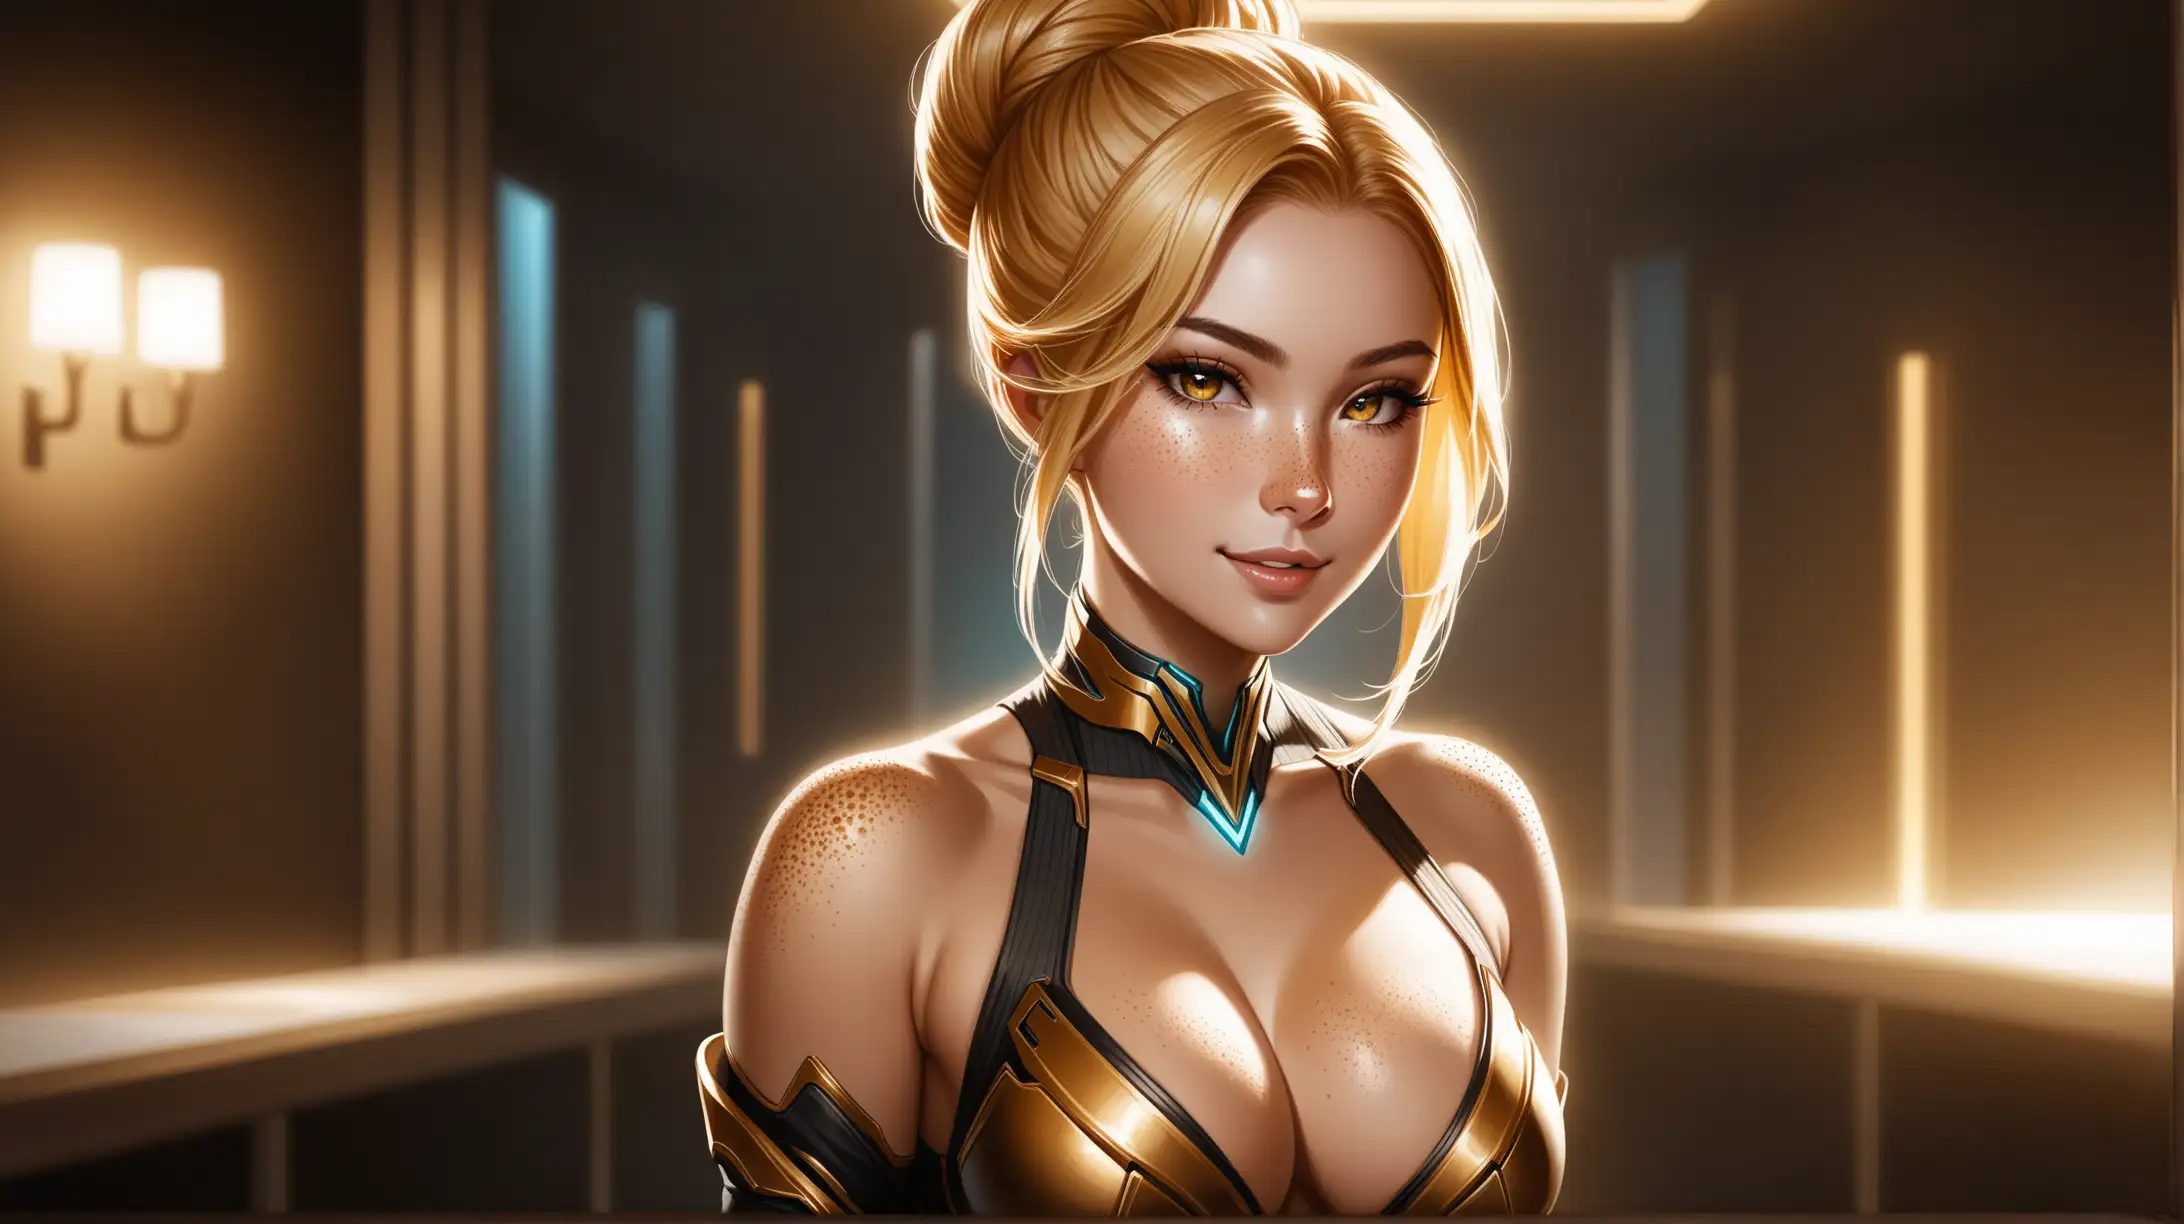 Draw a woman, long blonde hair in a bun, gold eyes, freckles, perky body, outfit inspired from Warframe, high quality, realistic, long shot, ambient lighting, indoors, seductive pose, cleavage, smiling toward the viewer